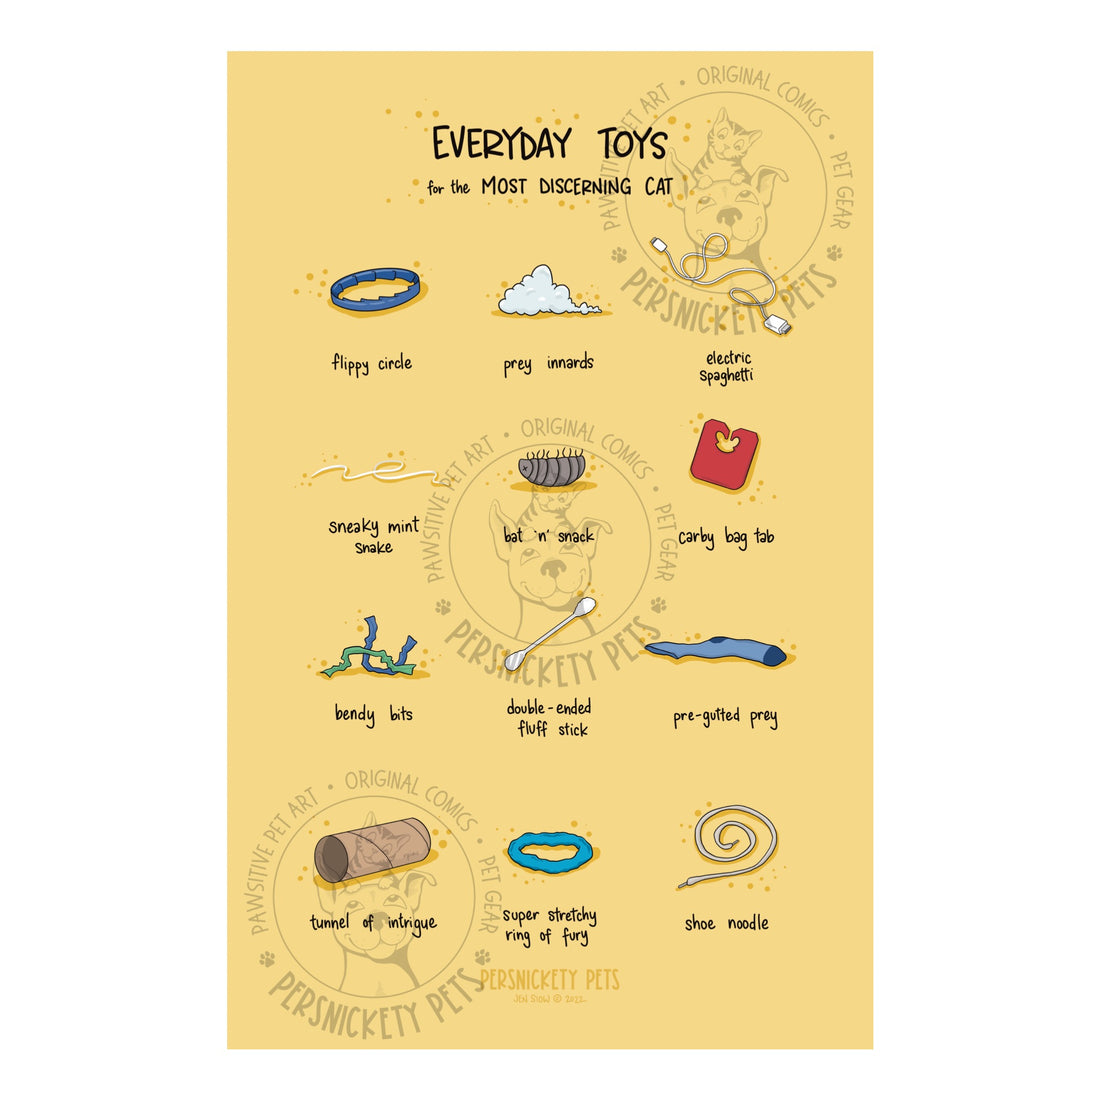 Persnickety Pets: Everyday cat toys art print, poster, 11x17